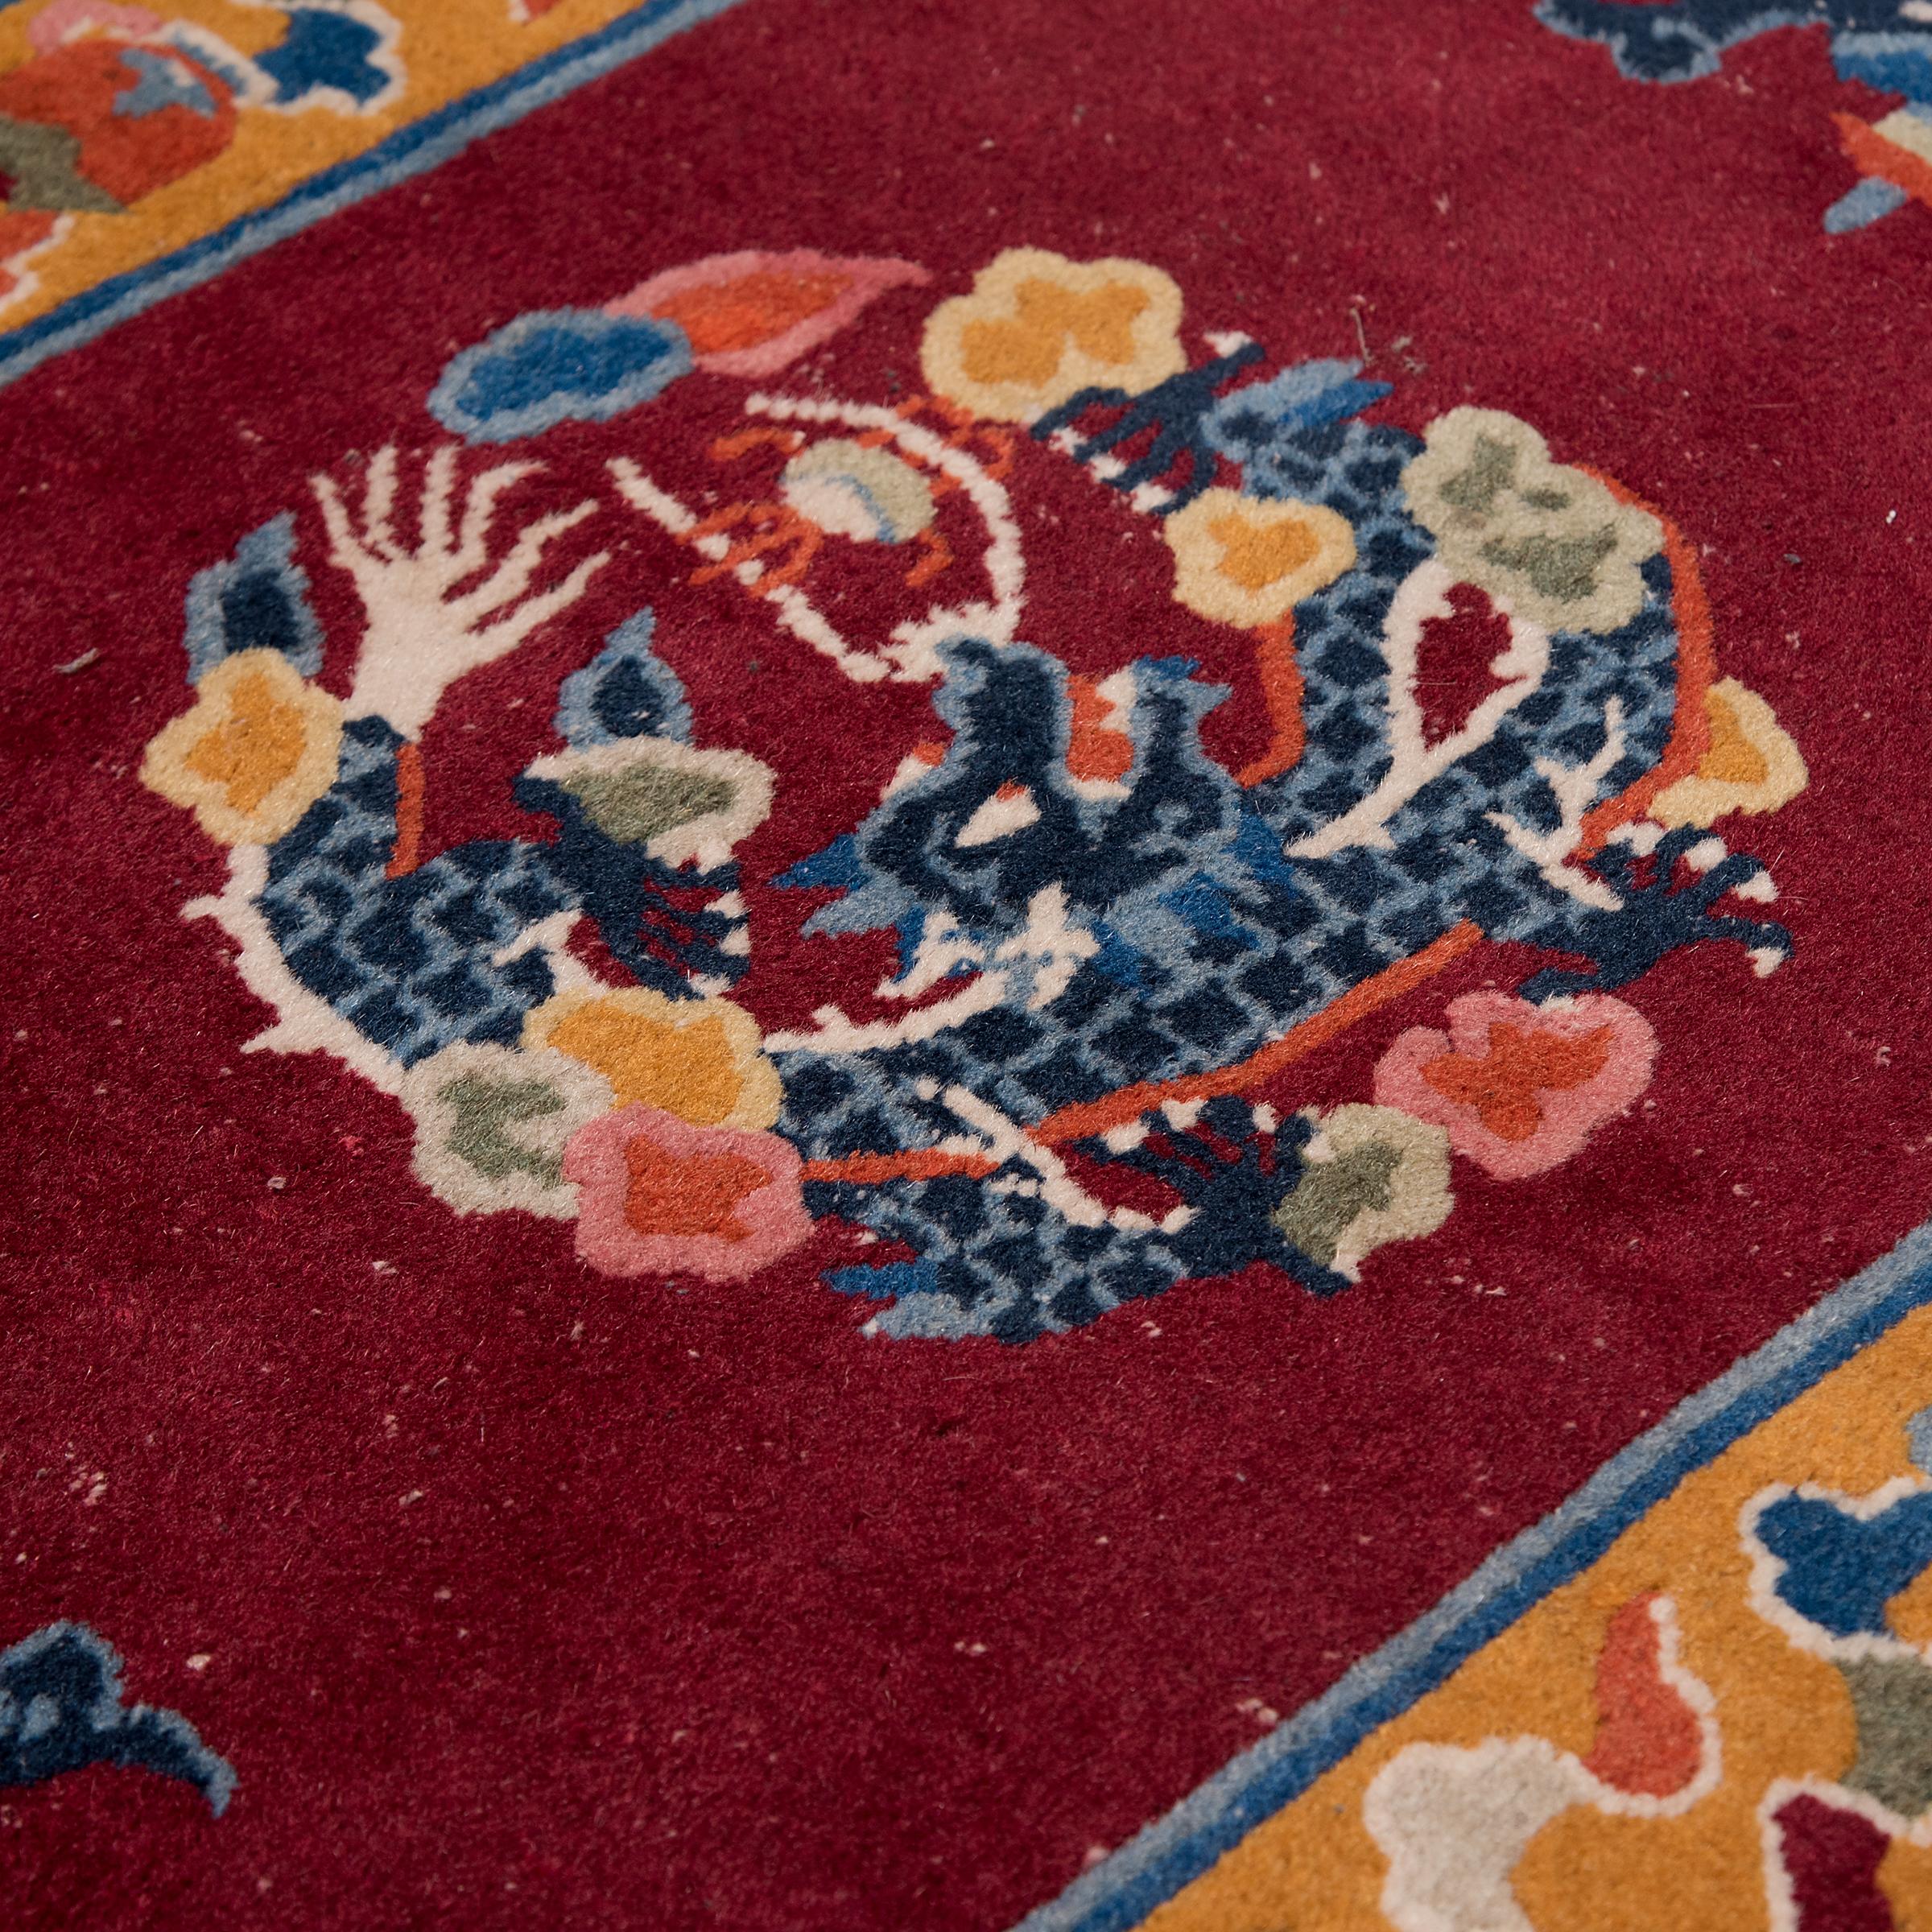 Chinese Export Celestial Chinese Dragon Carpet For Sale